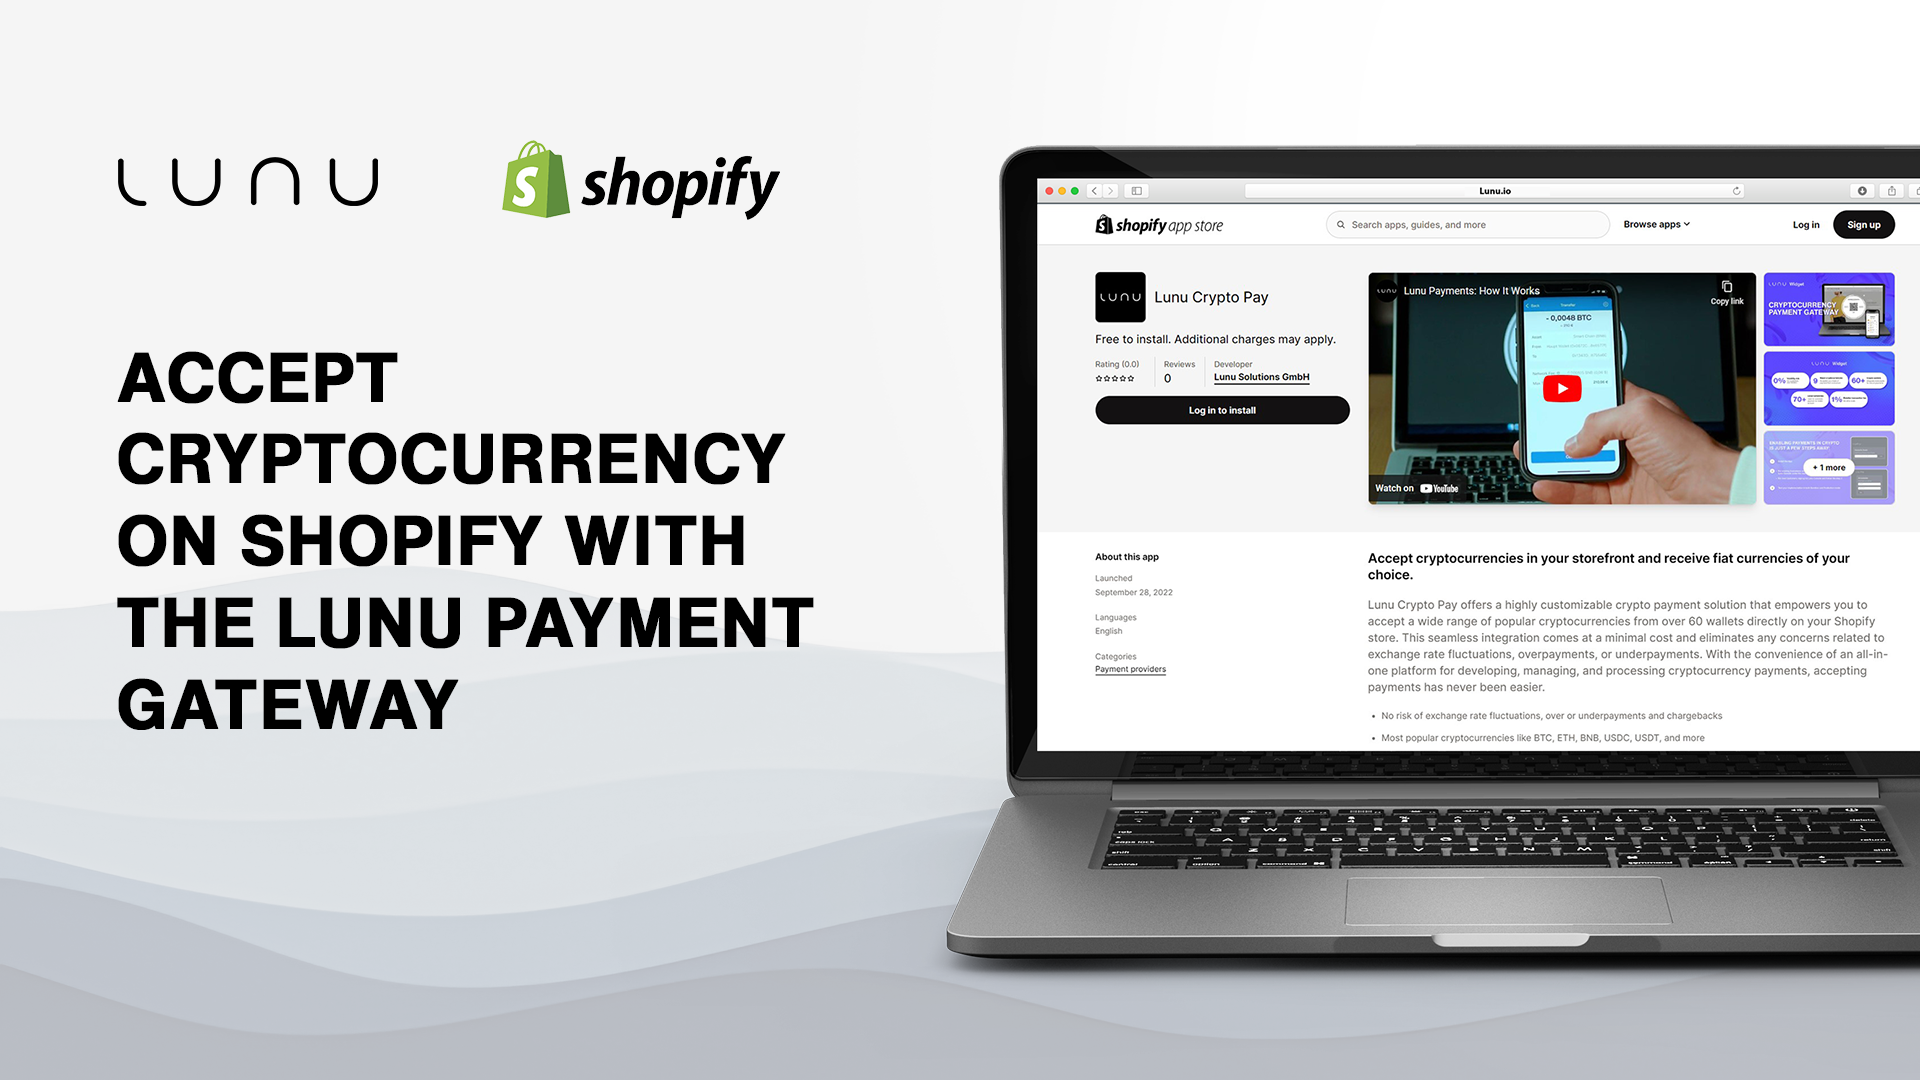 Shopify Crypto Payments Gateway by Lunu: Receive Cryptocurrency Using the Shopify Payment Gateway